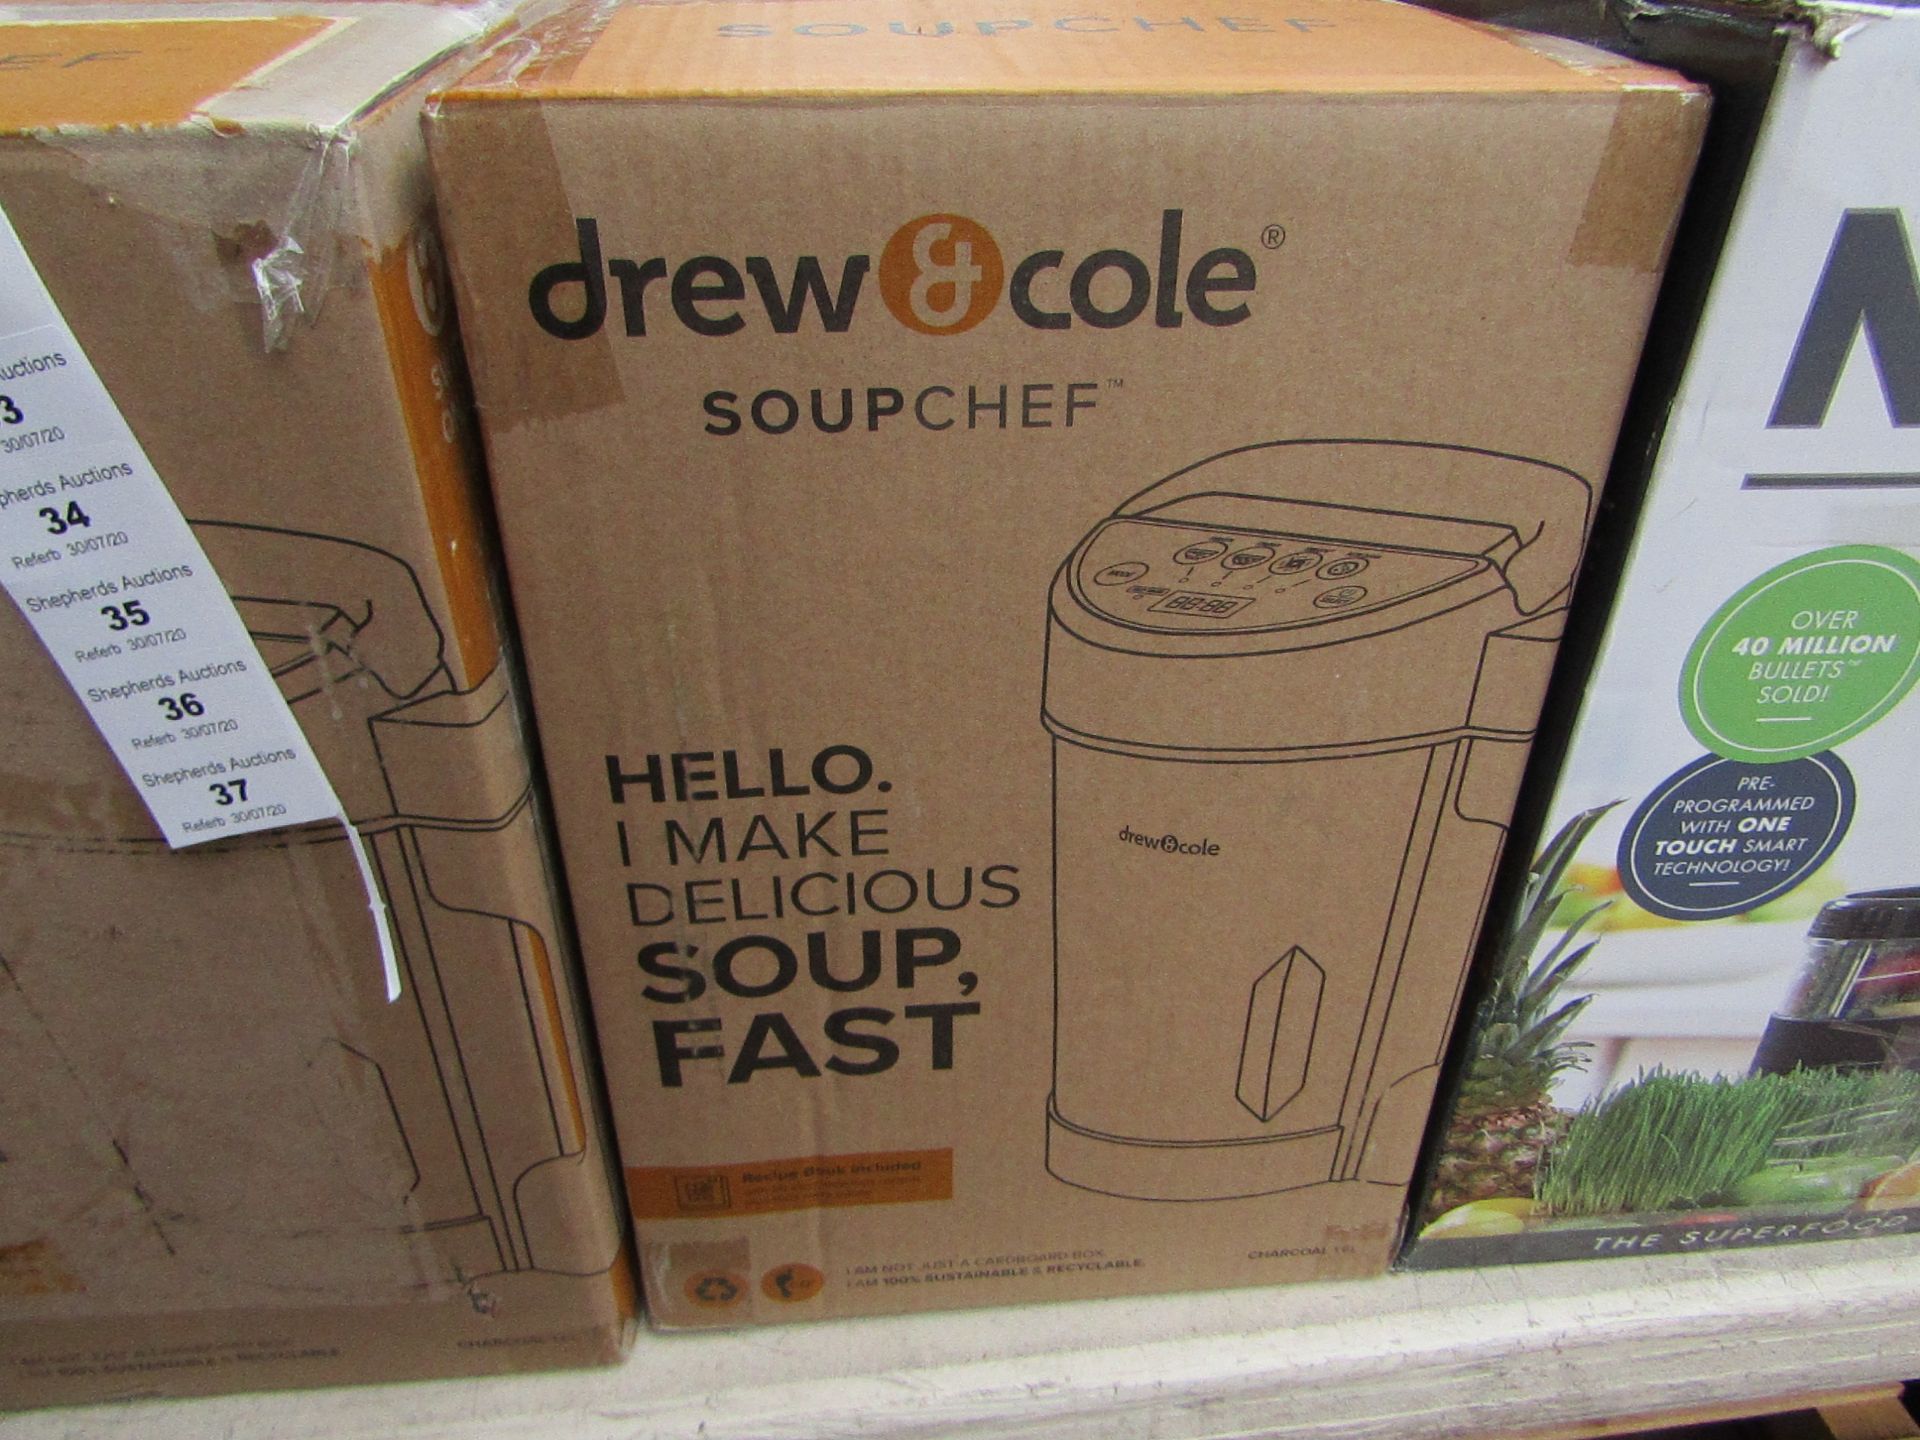 | 1X | DREW AND COLE SOUP CHEF | BOXED AND REFURBISHED | NO ONLINE RESALE | SKU C 5060541516809 |